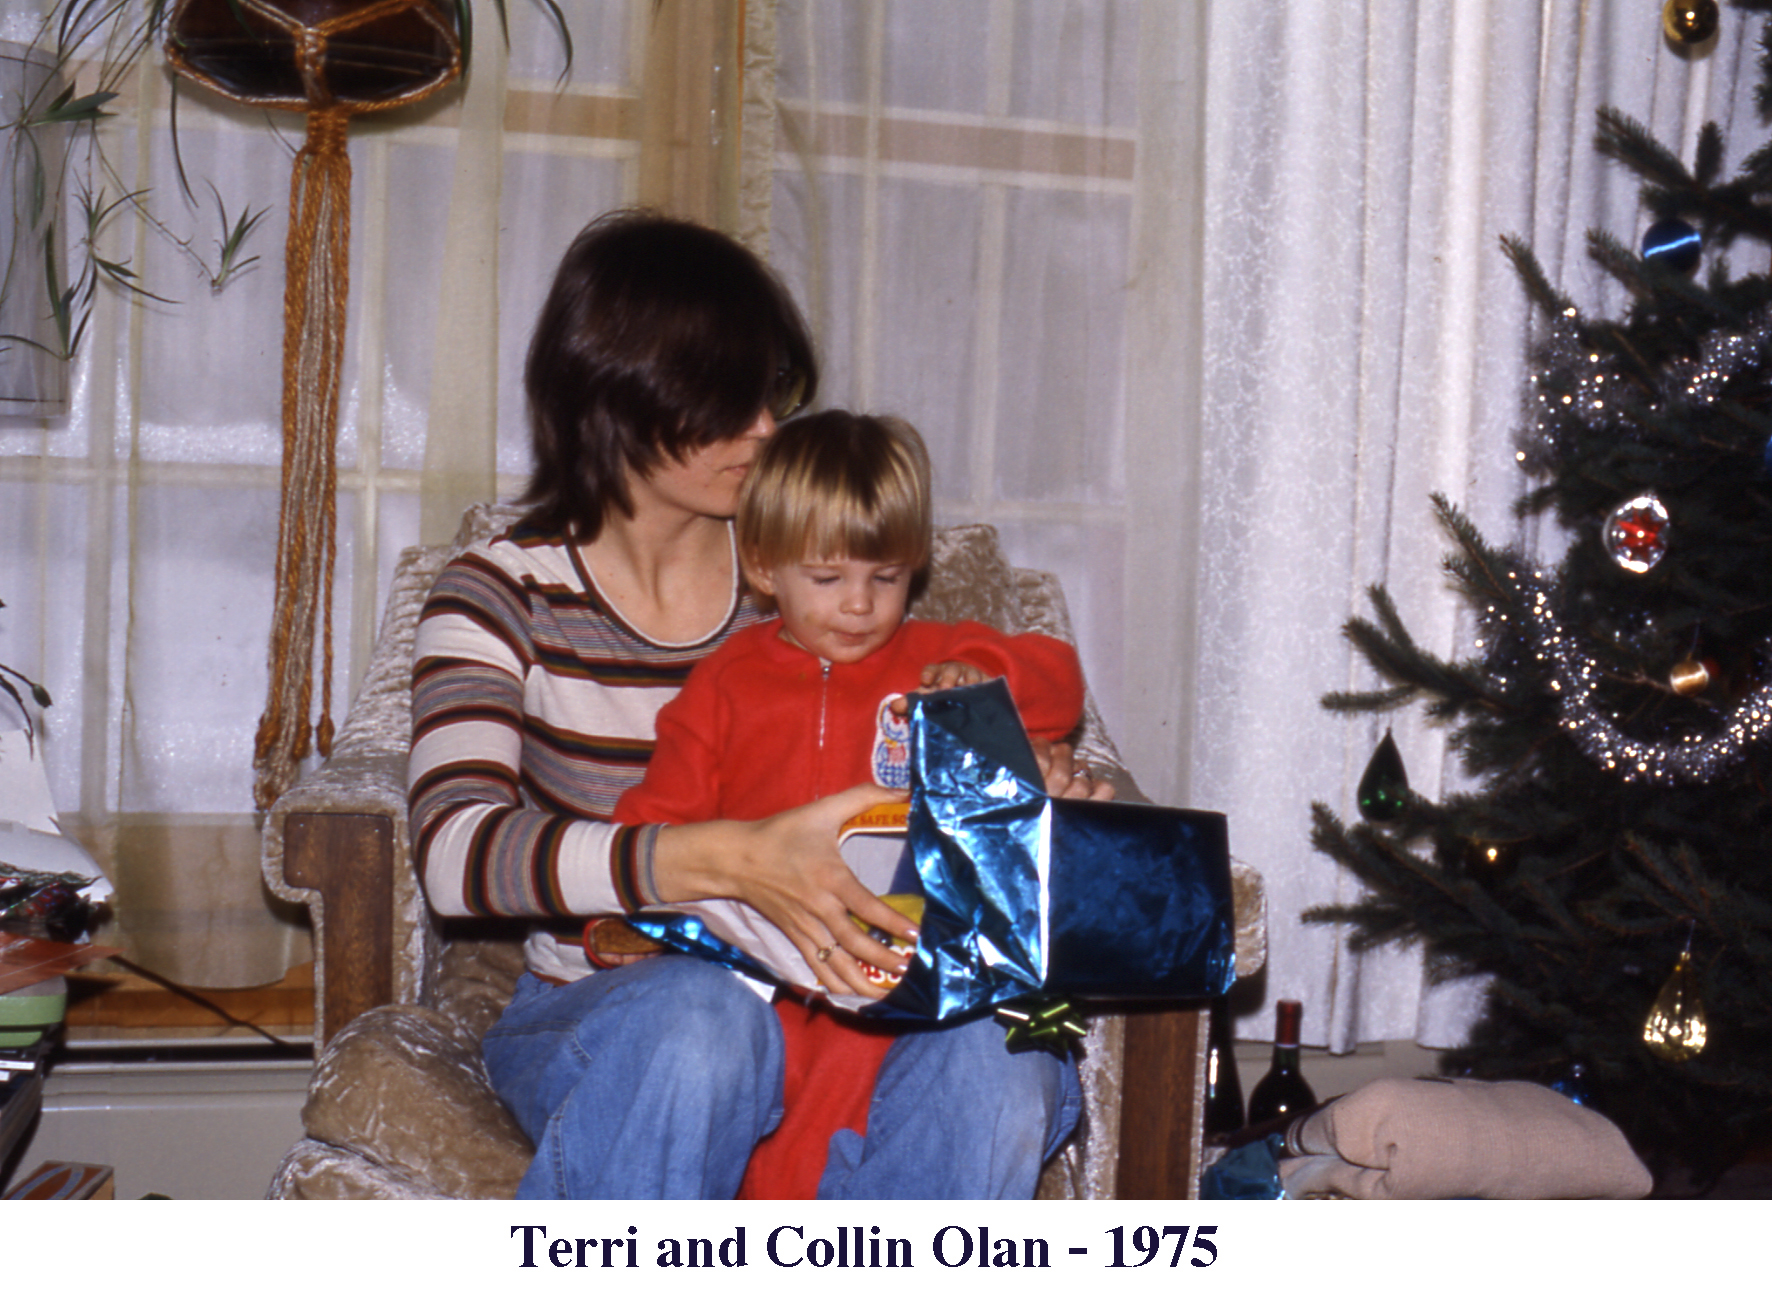 Terri and Collin Olan sitting in a chair and opening a blue-wrapped gift 
       at Christmas 1975